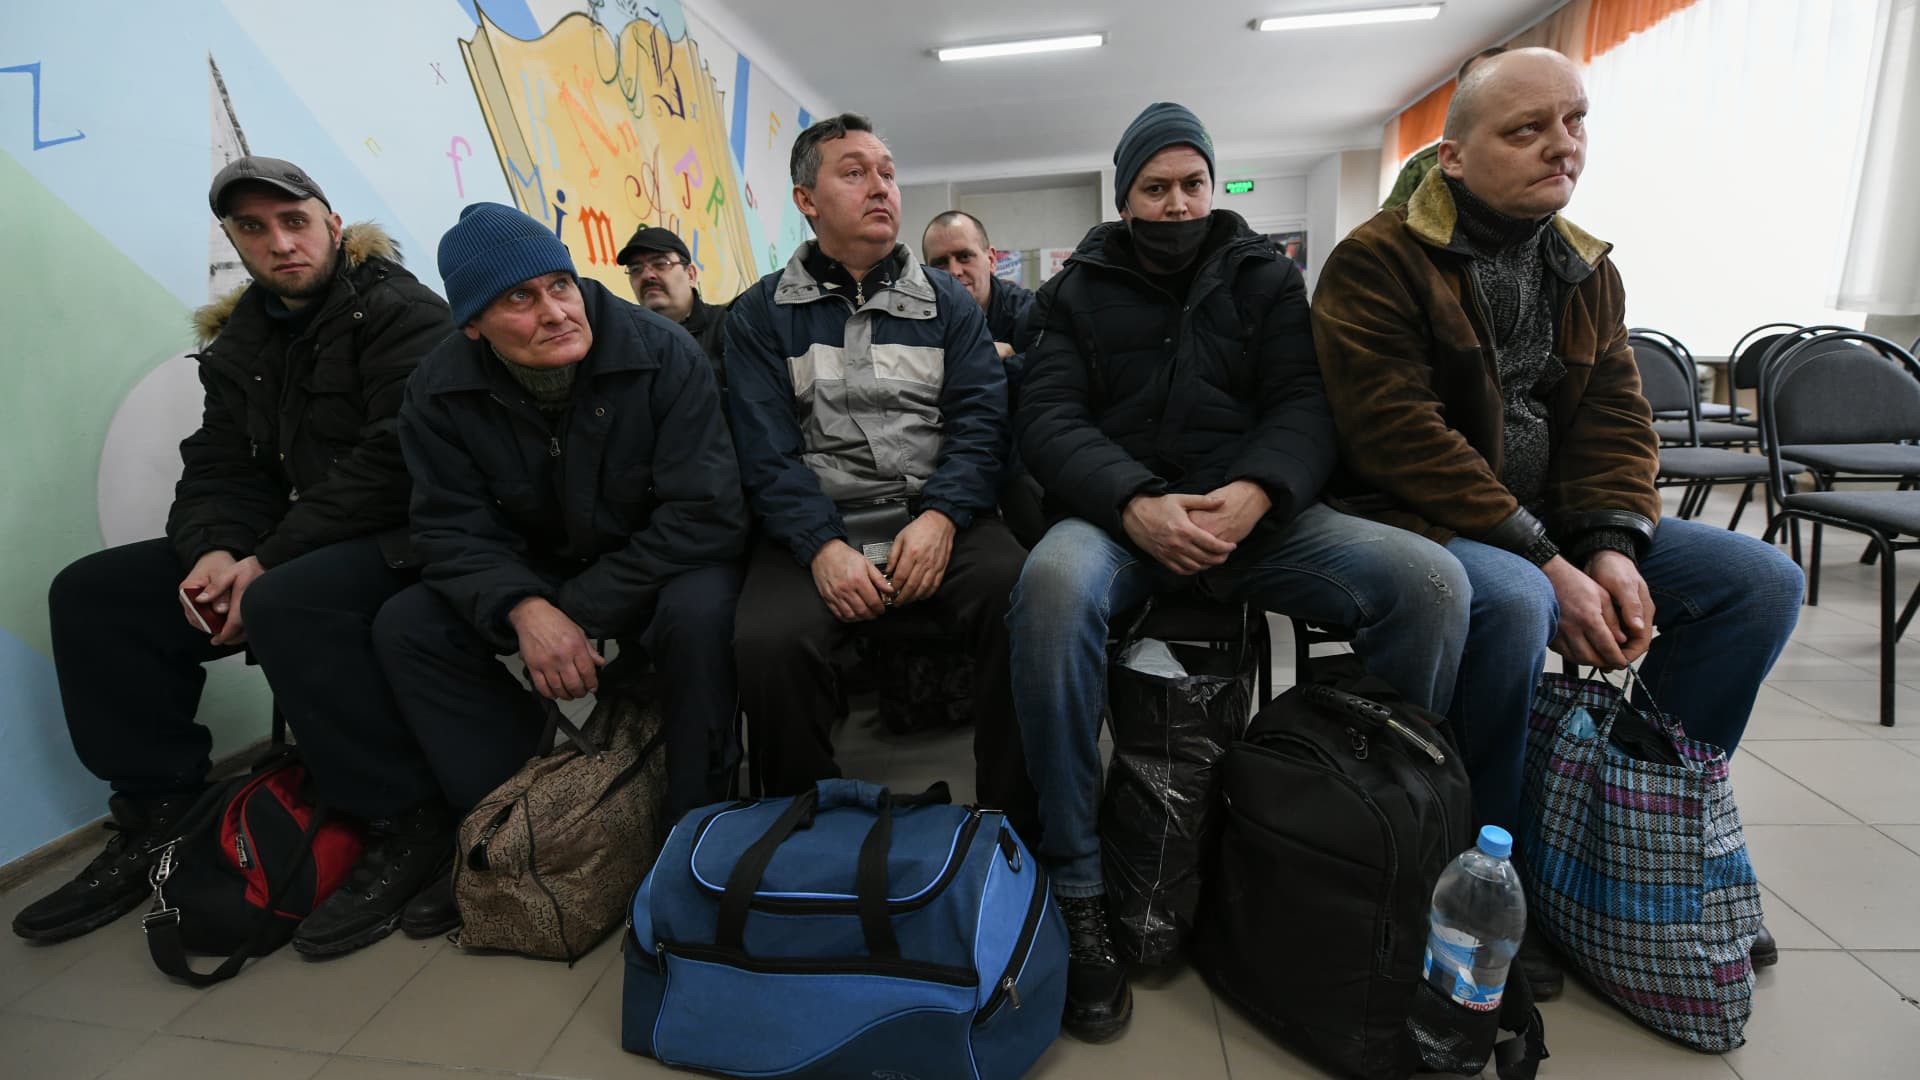 People arrive at recruiting office to register themselves after declaration of mobilization in the Donetsk region under the control of pro-Russian separatists, on February 23, 2022.